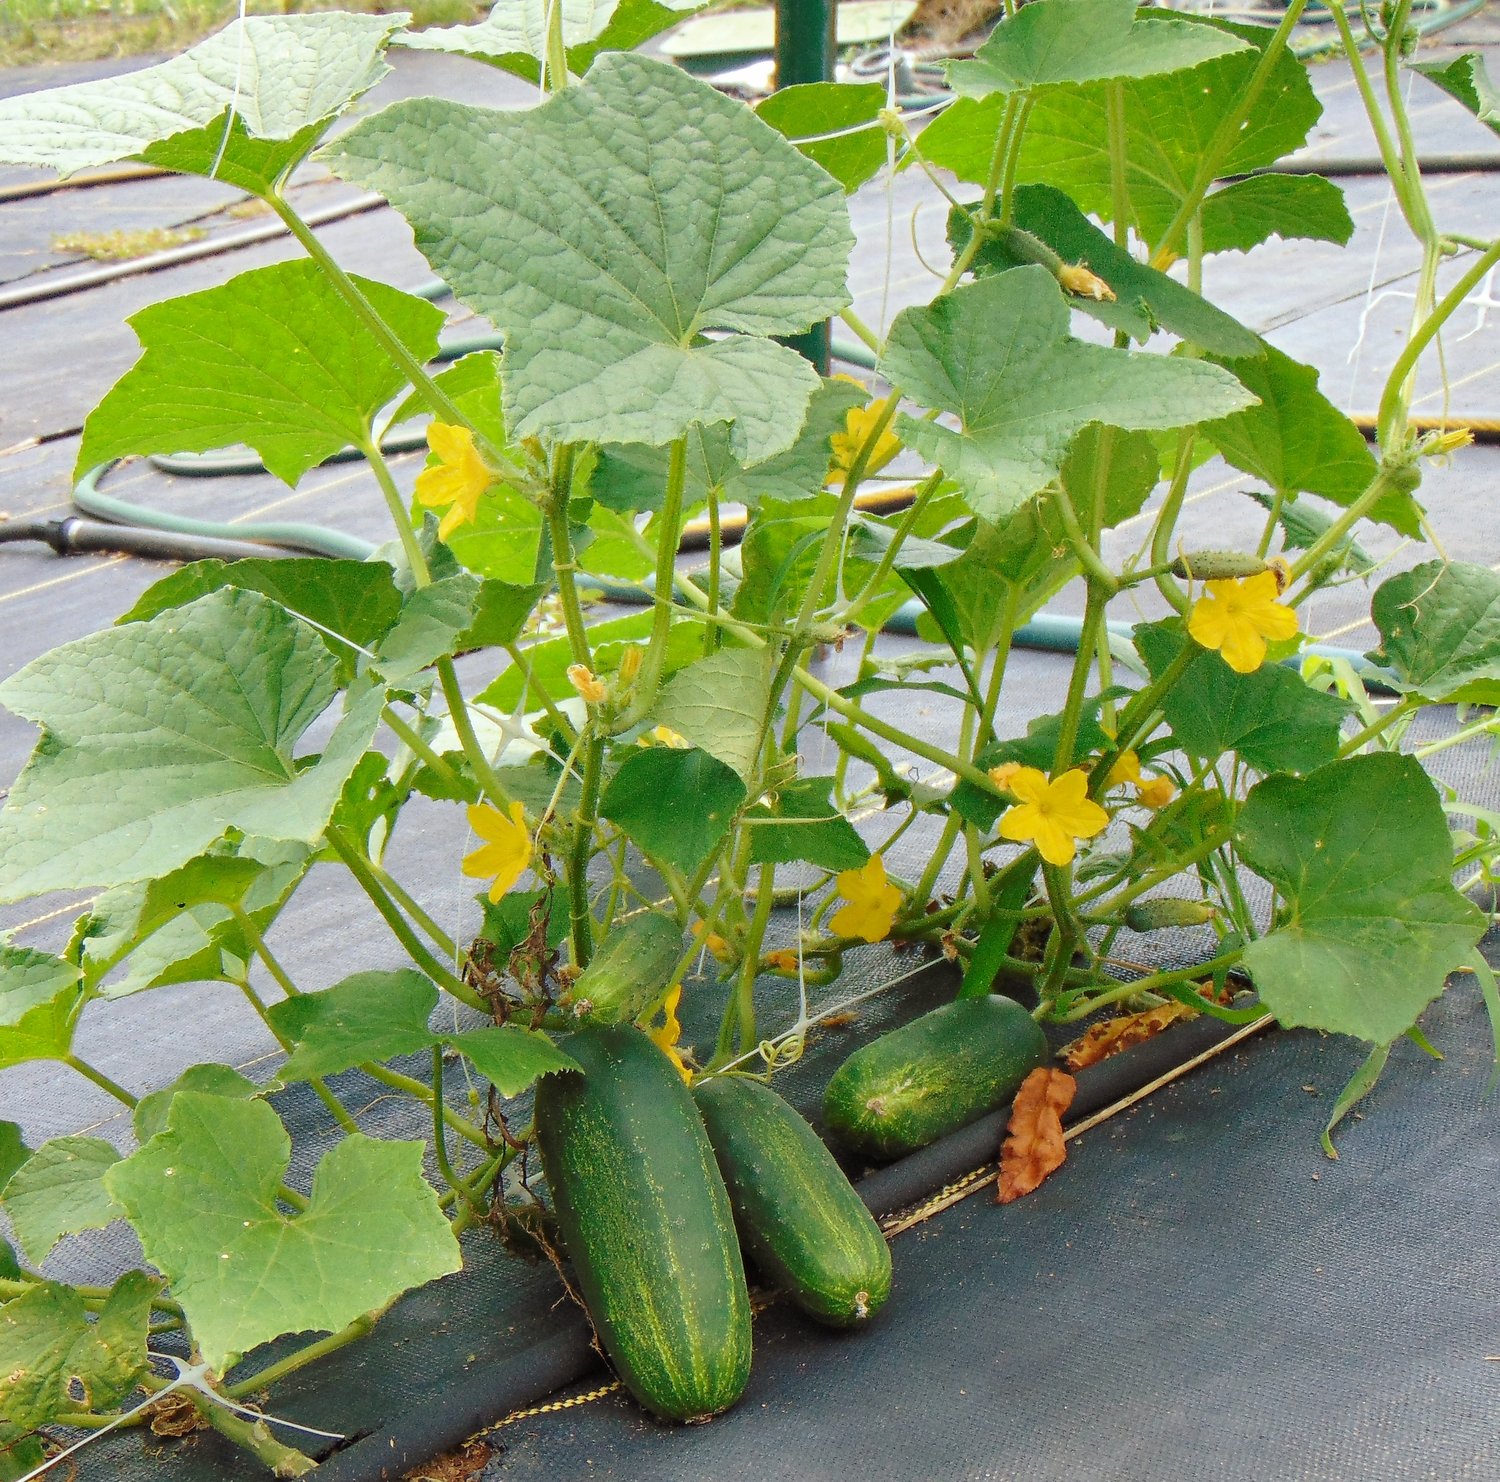 Large cucumbers are just some of the many vegetables grow on the Waid farm.